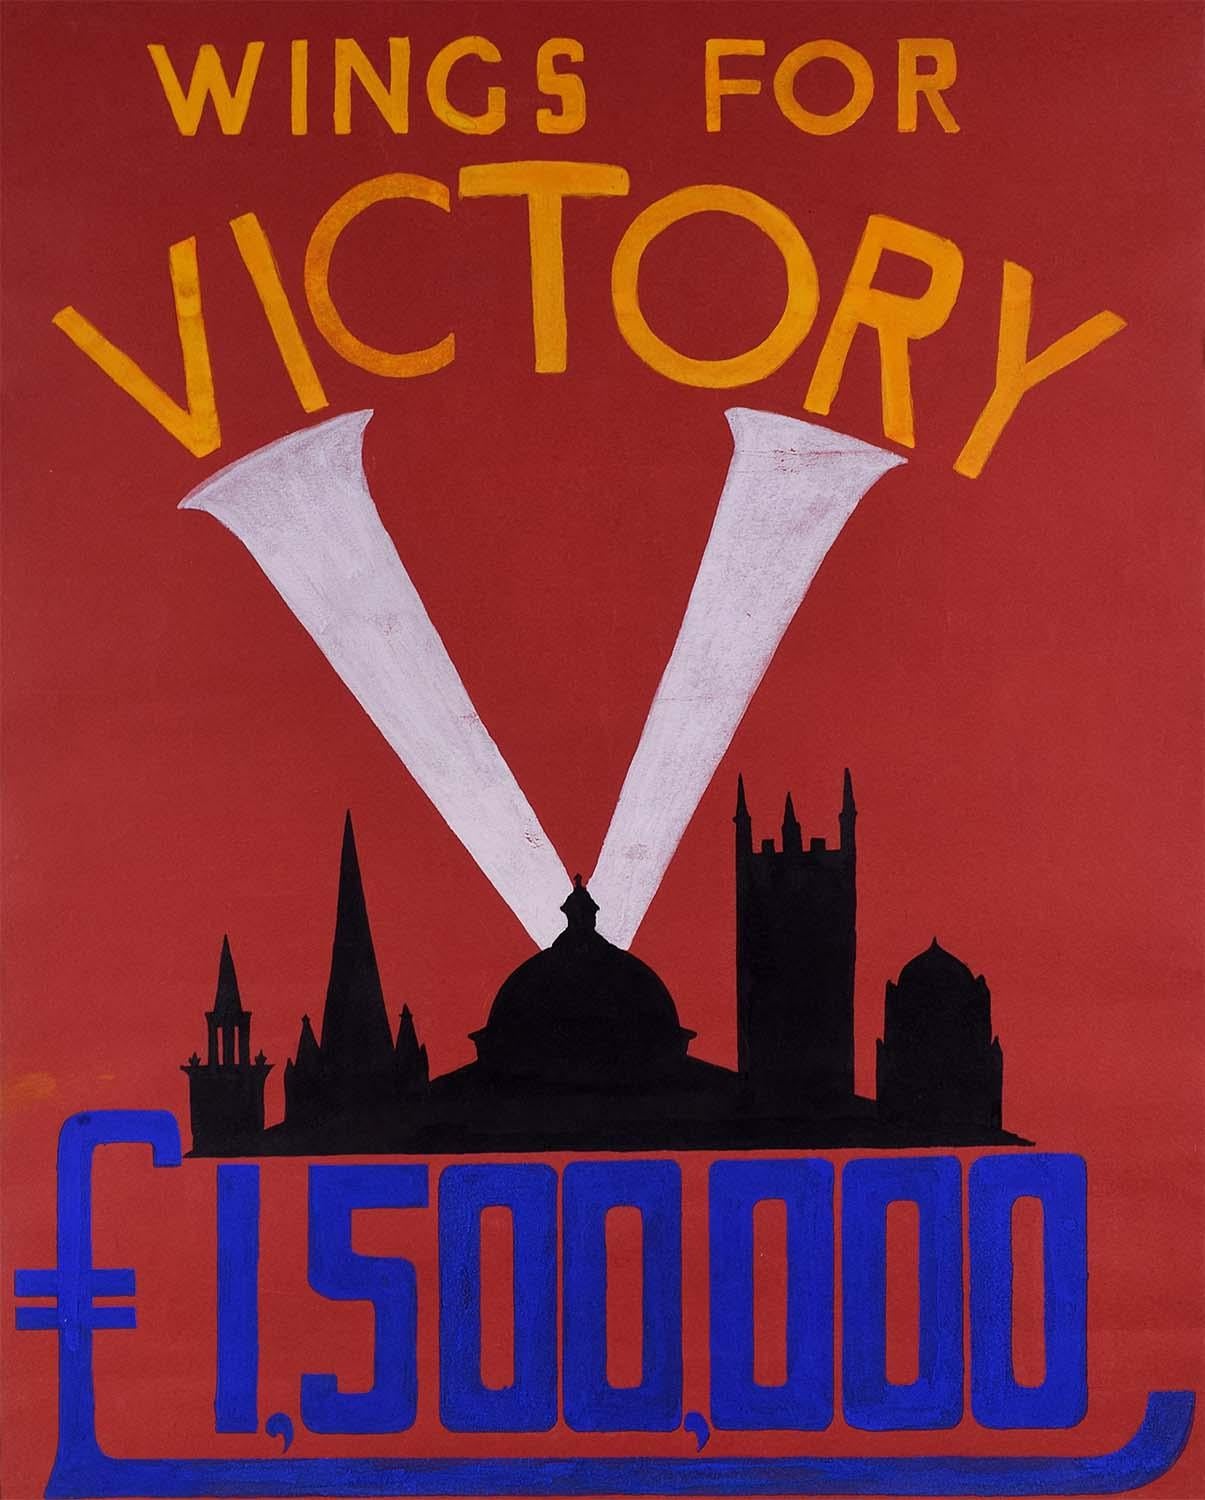 WW2 Oxford Wings for Victory Original Vintage Poster Design Gouache World War II